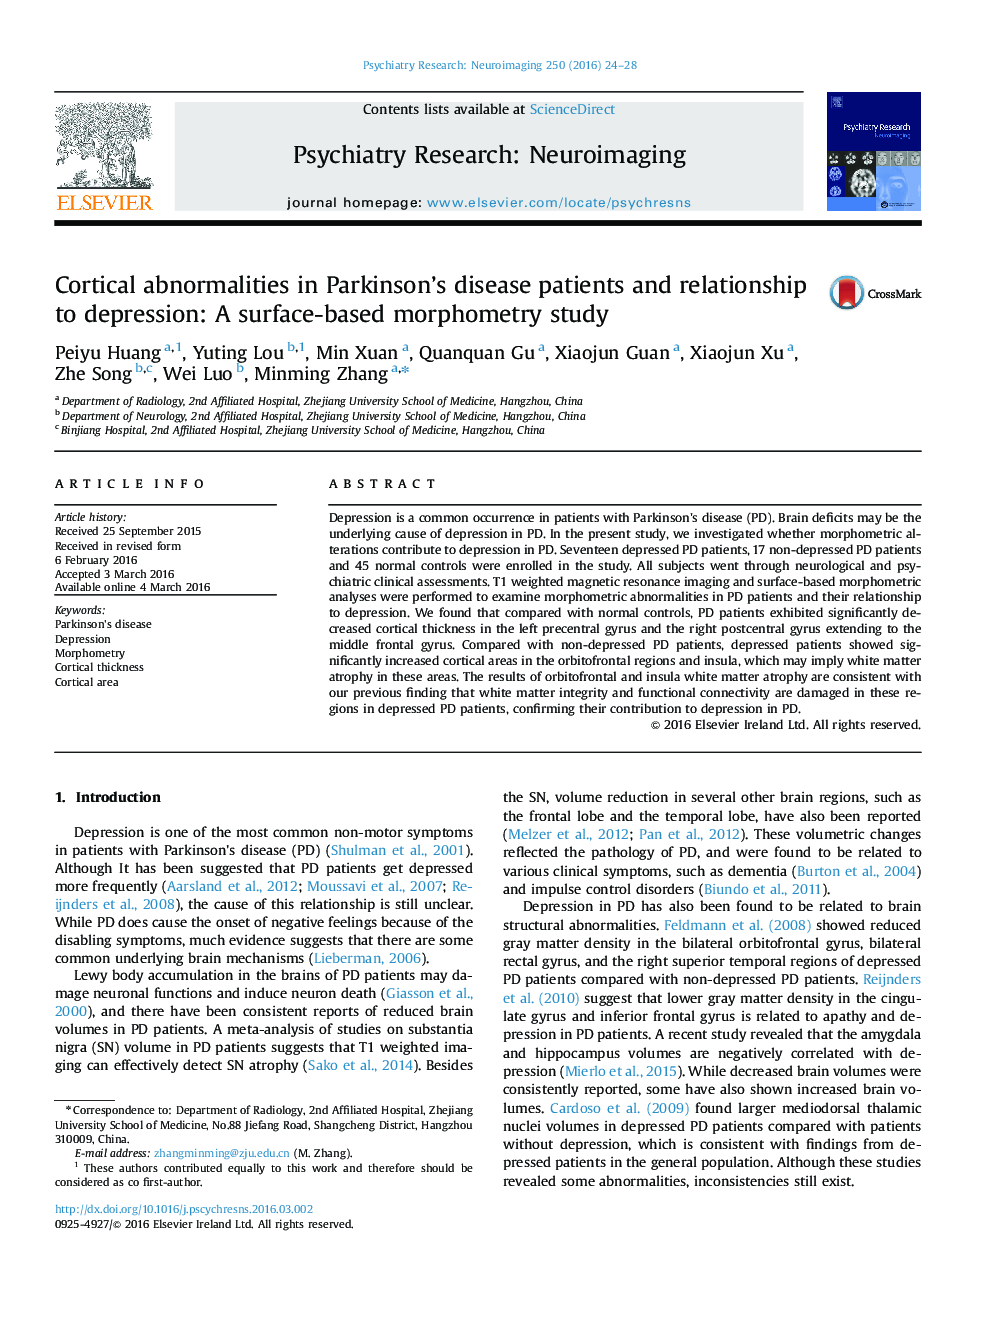 Cortical abnormalities in Parkinson’s disease patients and relationship to depression: A surface-based morphometry study